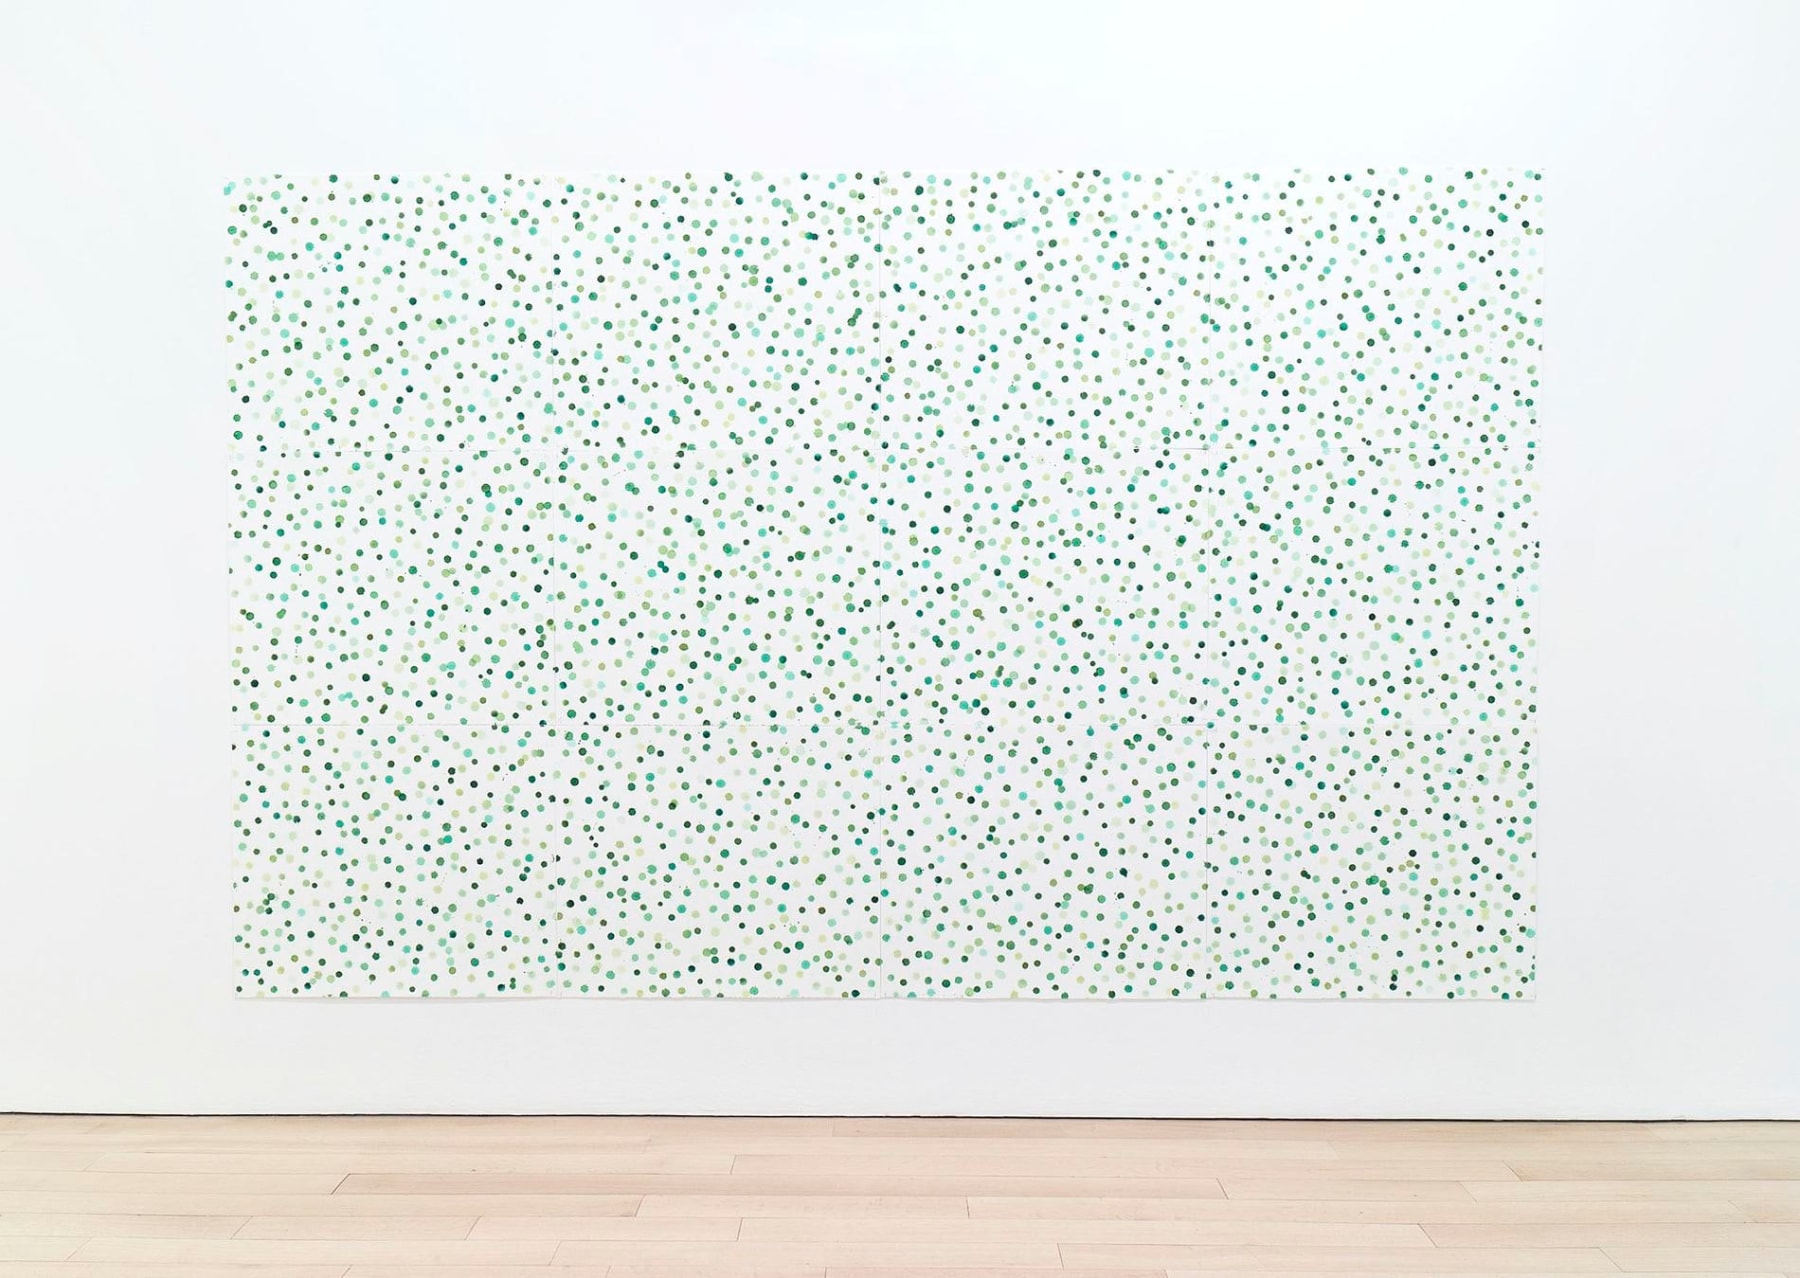 Image of SPENCER FINCH'S Spring (3,563 greens) 2016